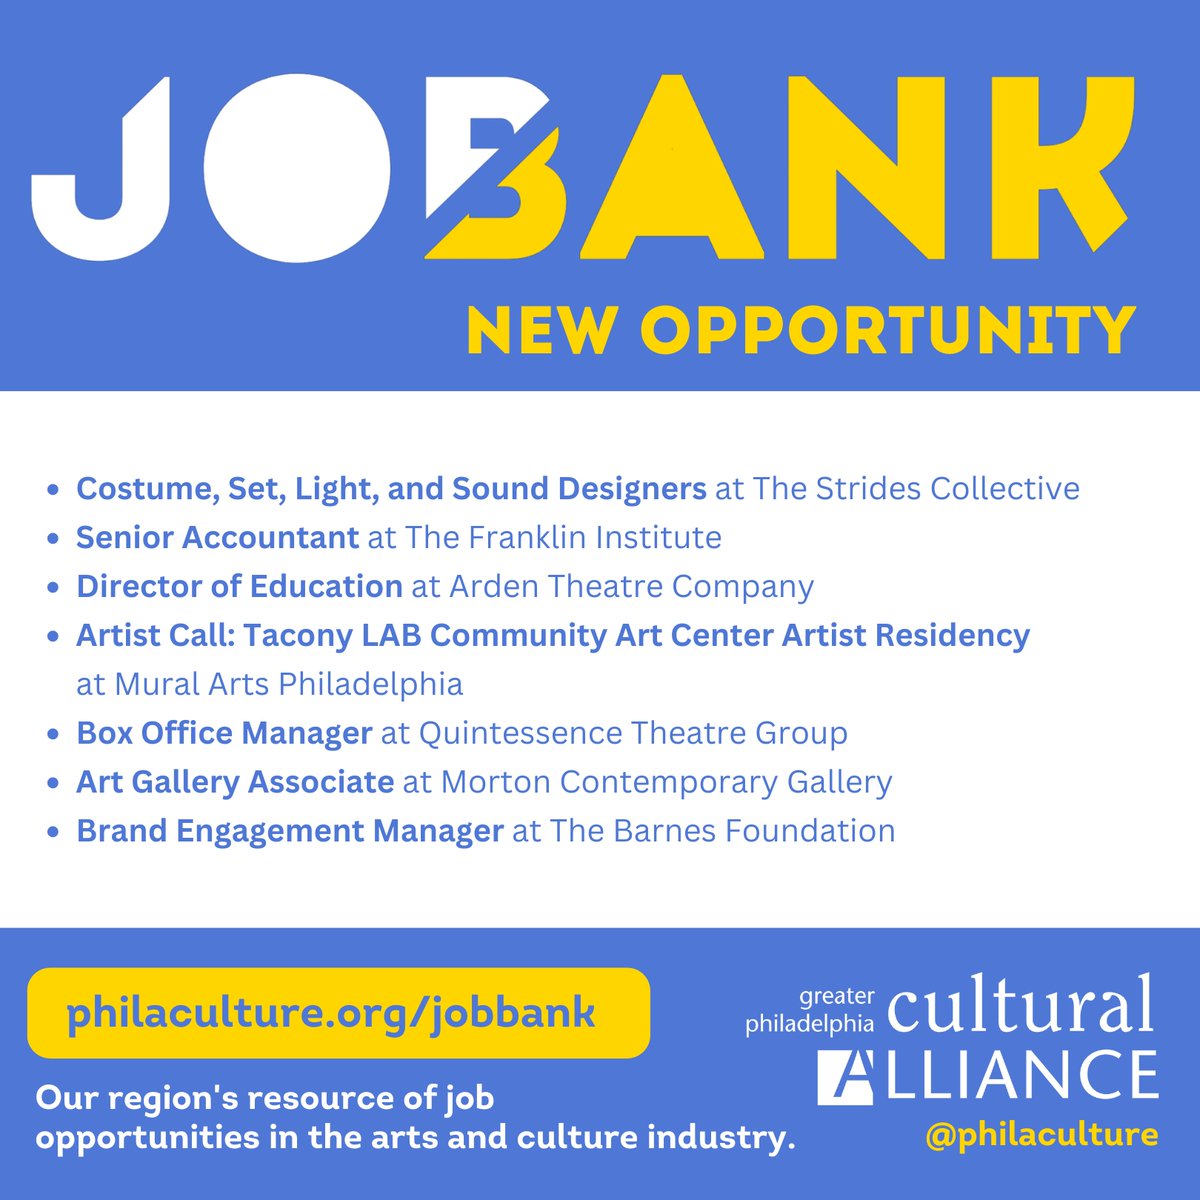 From set designing to box office management, the Job Bank has so many fun opportunities this week! Check out jobs from organizations like The Strides Collective, @TheFranklin, @ArdenTheatreCo, @muralarts, @QuintessencePHL, @MortonContemPHL, @the_barnes at philaculture.org/jobbank